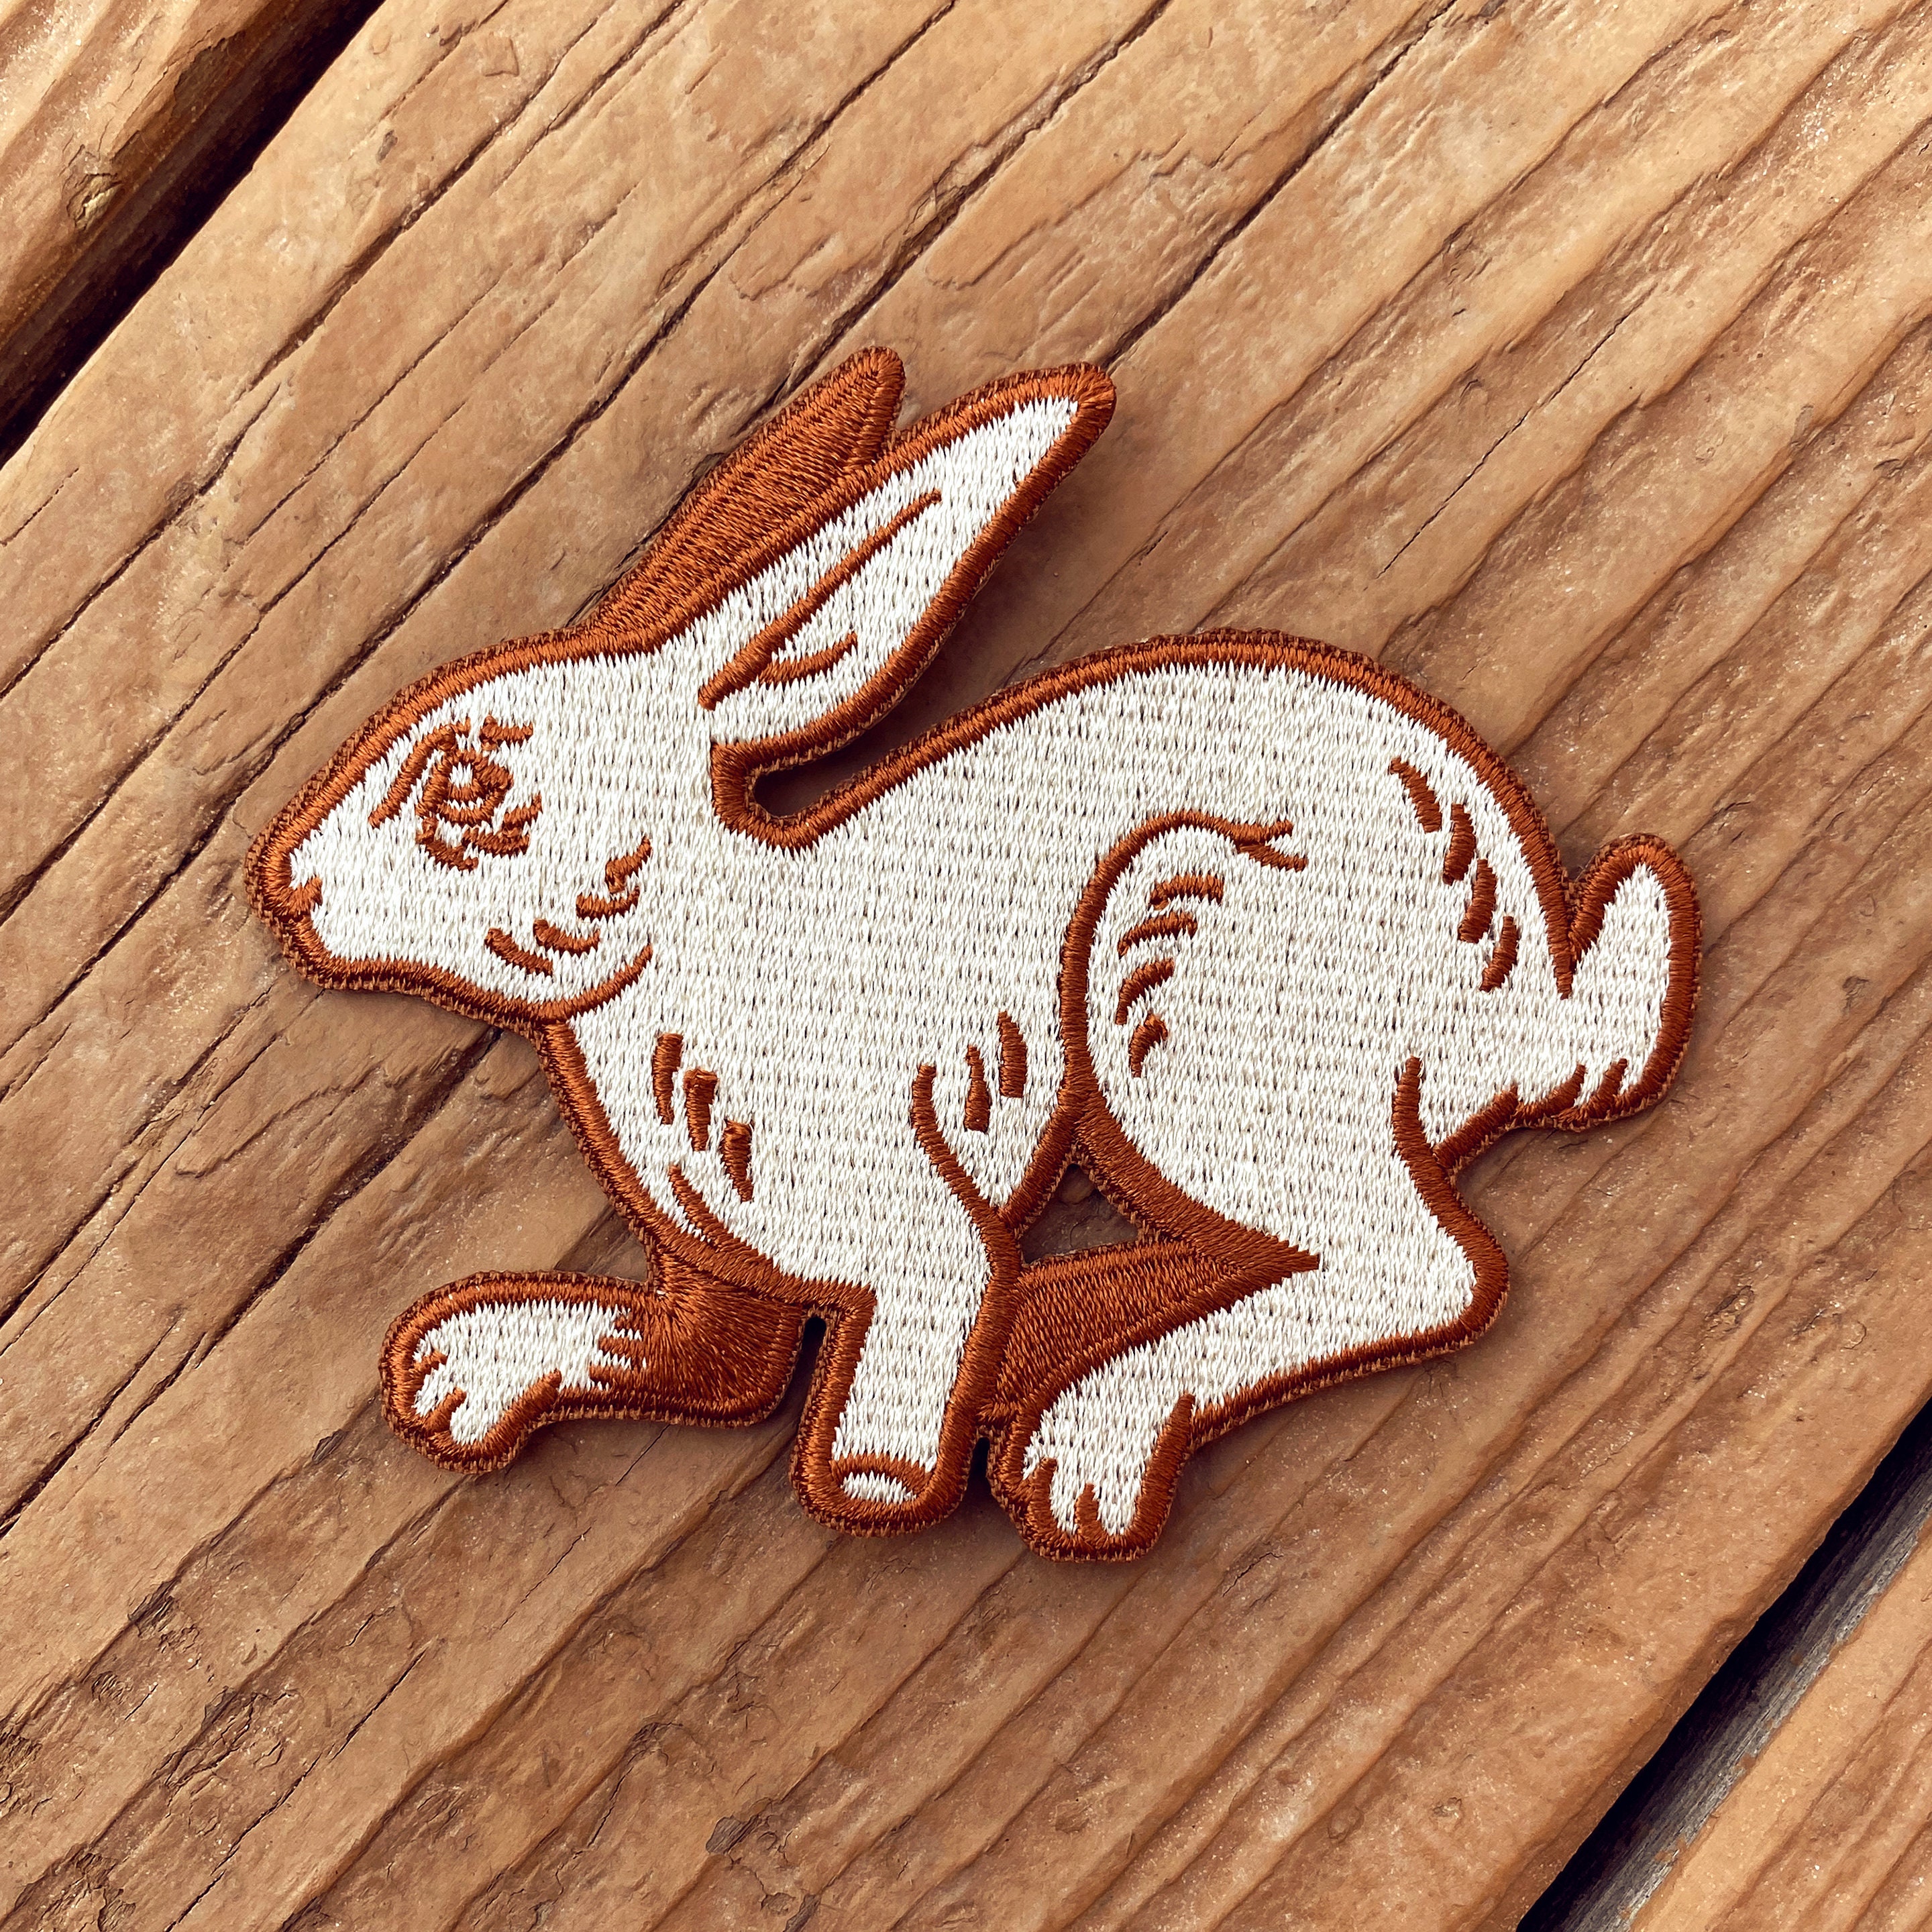 Bunnies Embroidered Patch Cute Patches Patches Tiny Patches Embroidery  Design Mini Rabbit Family Patches Iron On Patch Custom Patch ZZ8654